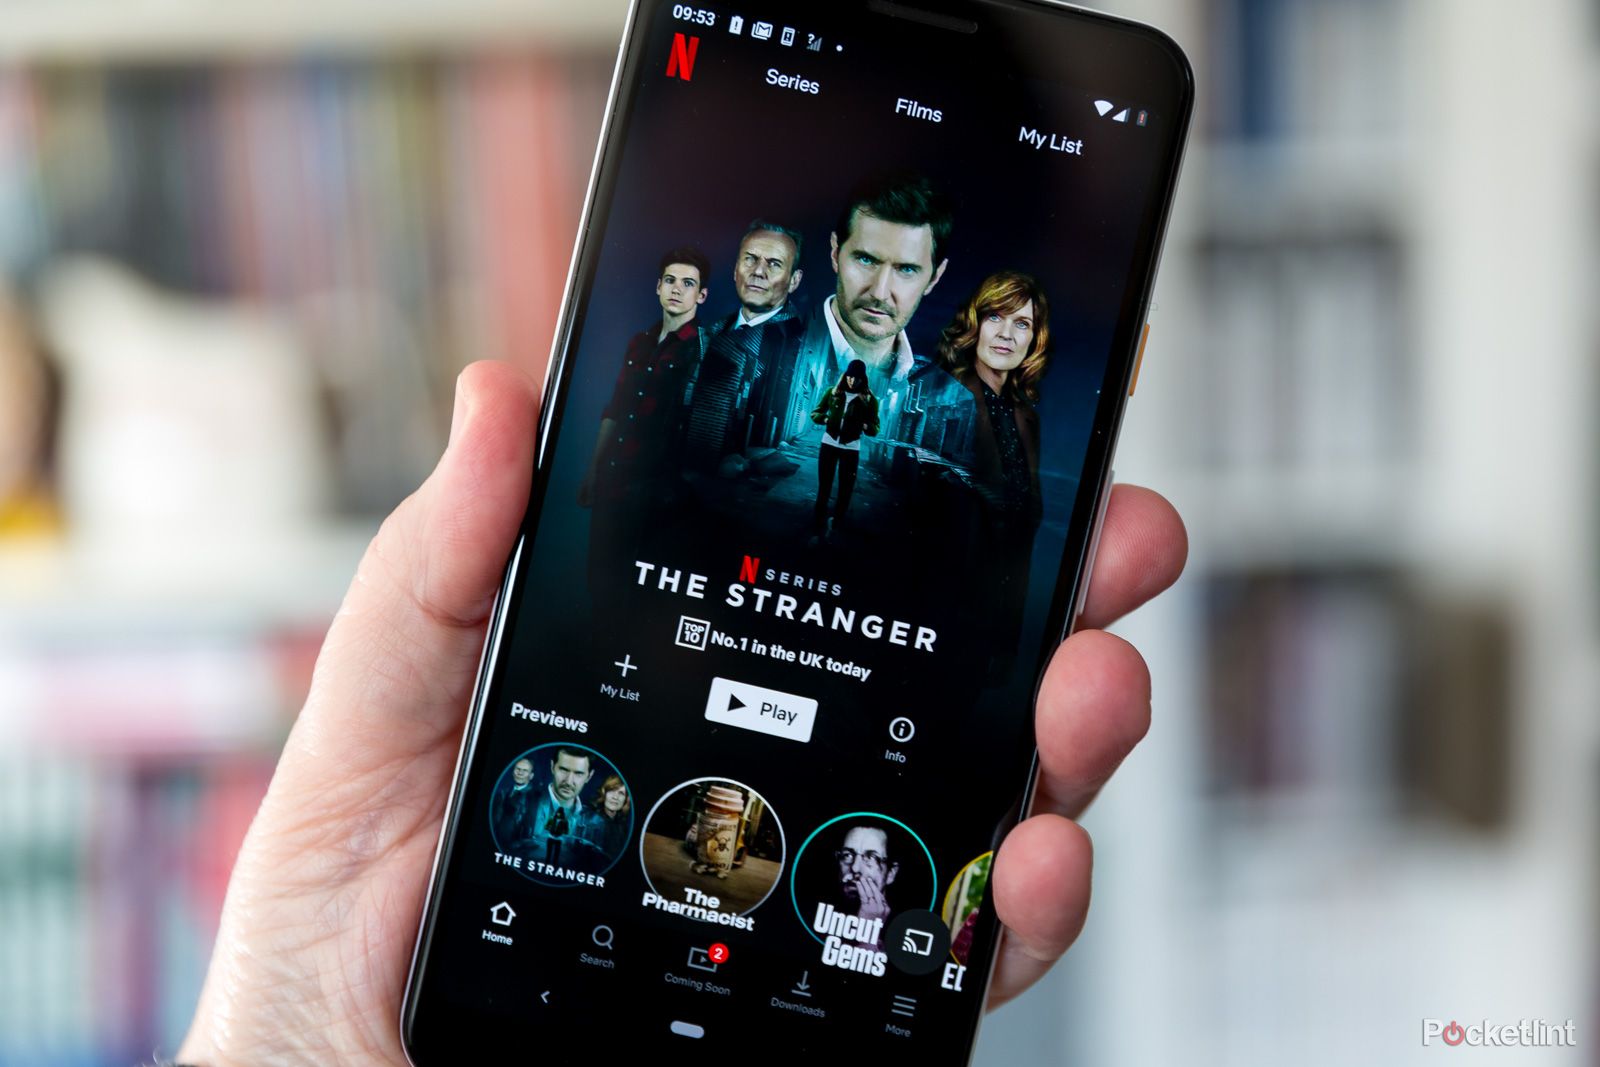 Netflix Brings Screen-locking To Android Devices Stopping Accidental Touches image 1